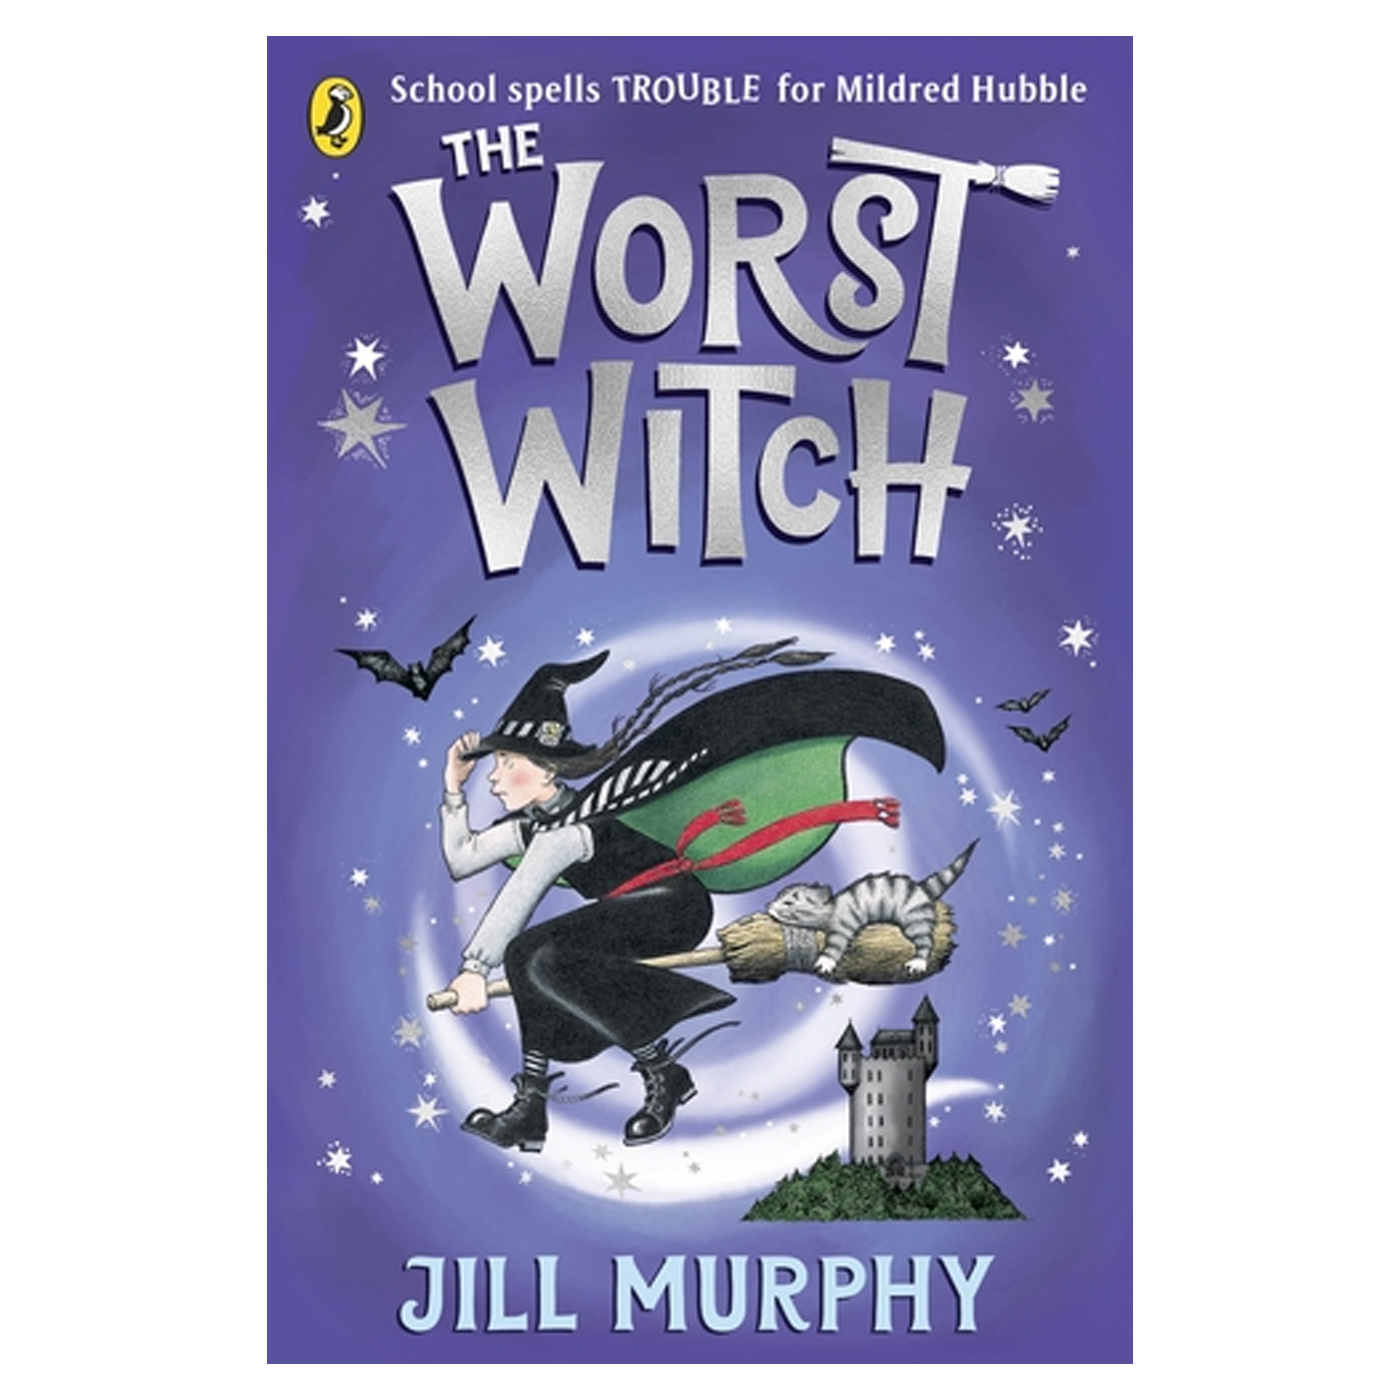  The Worst Witch